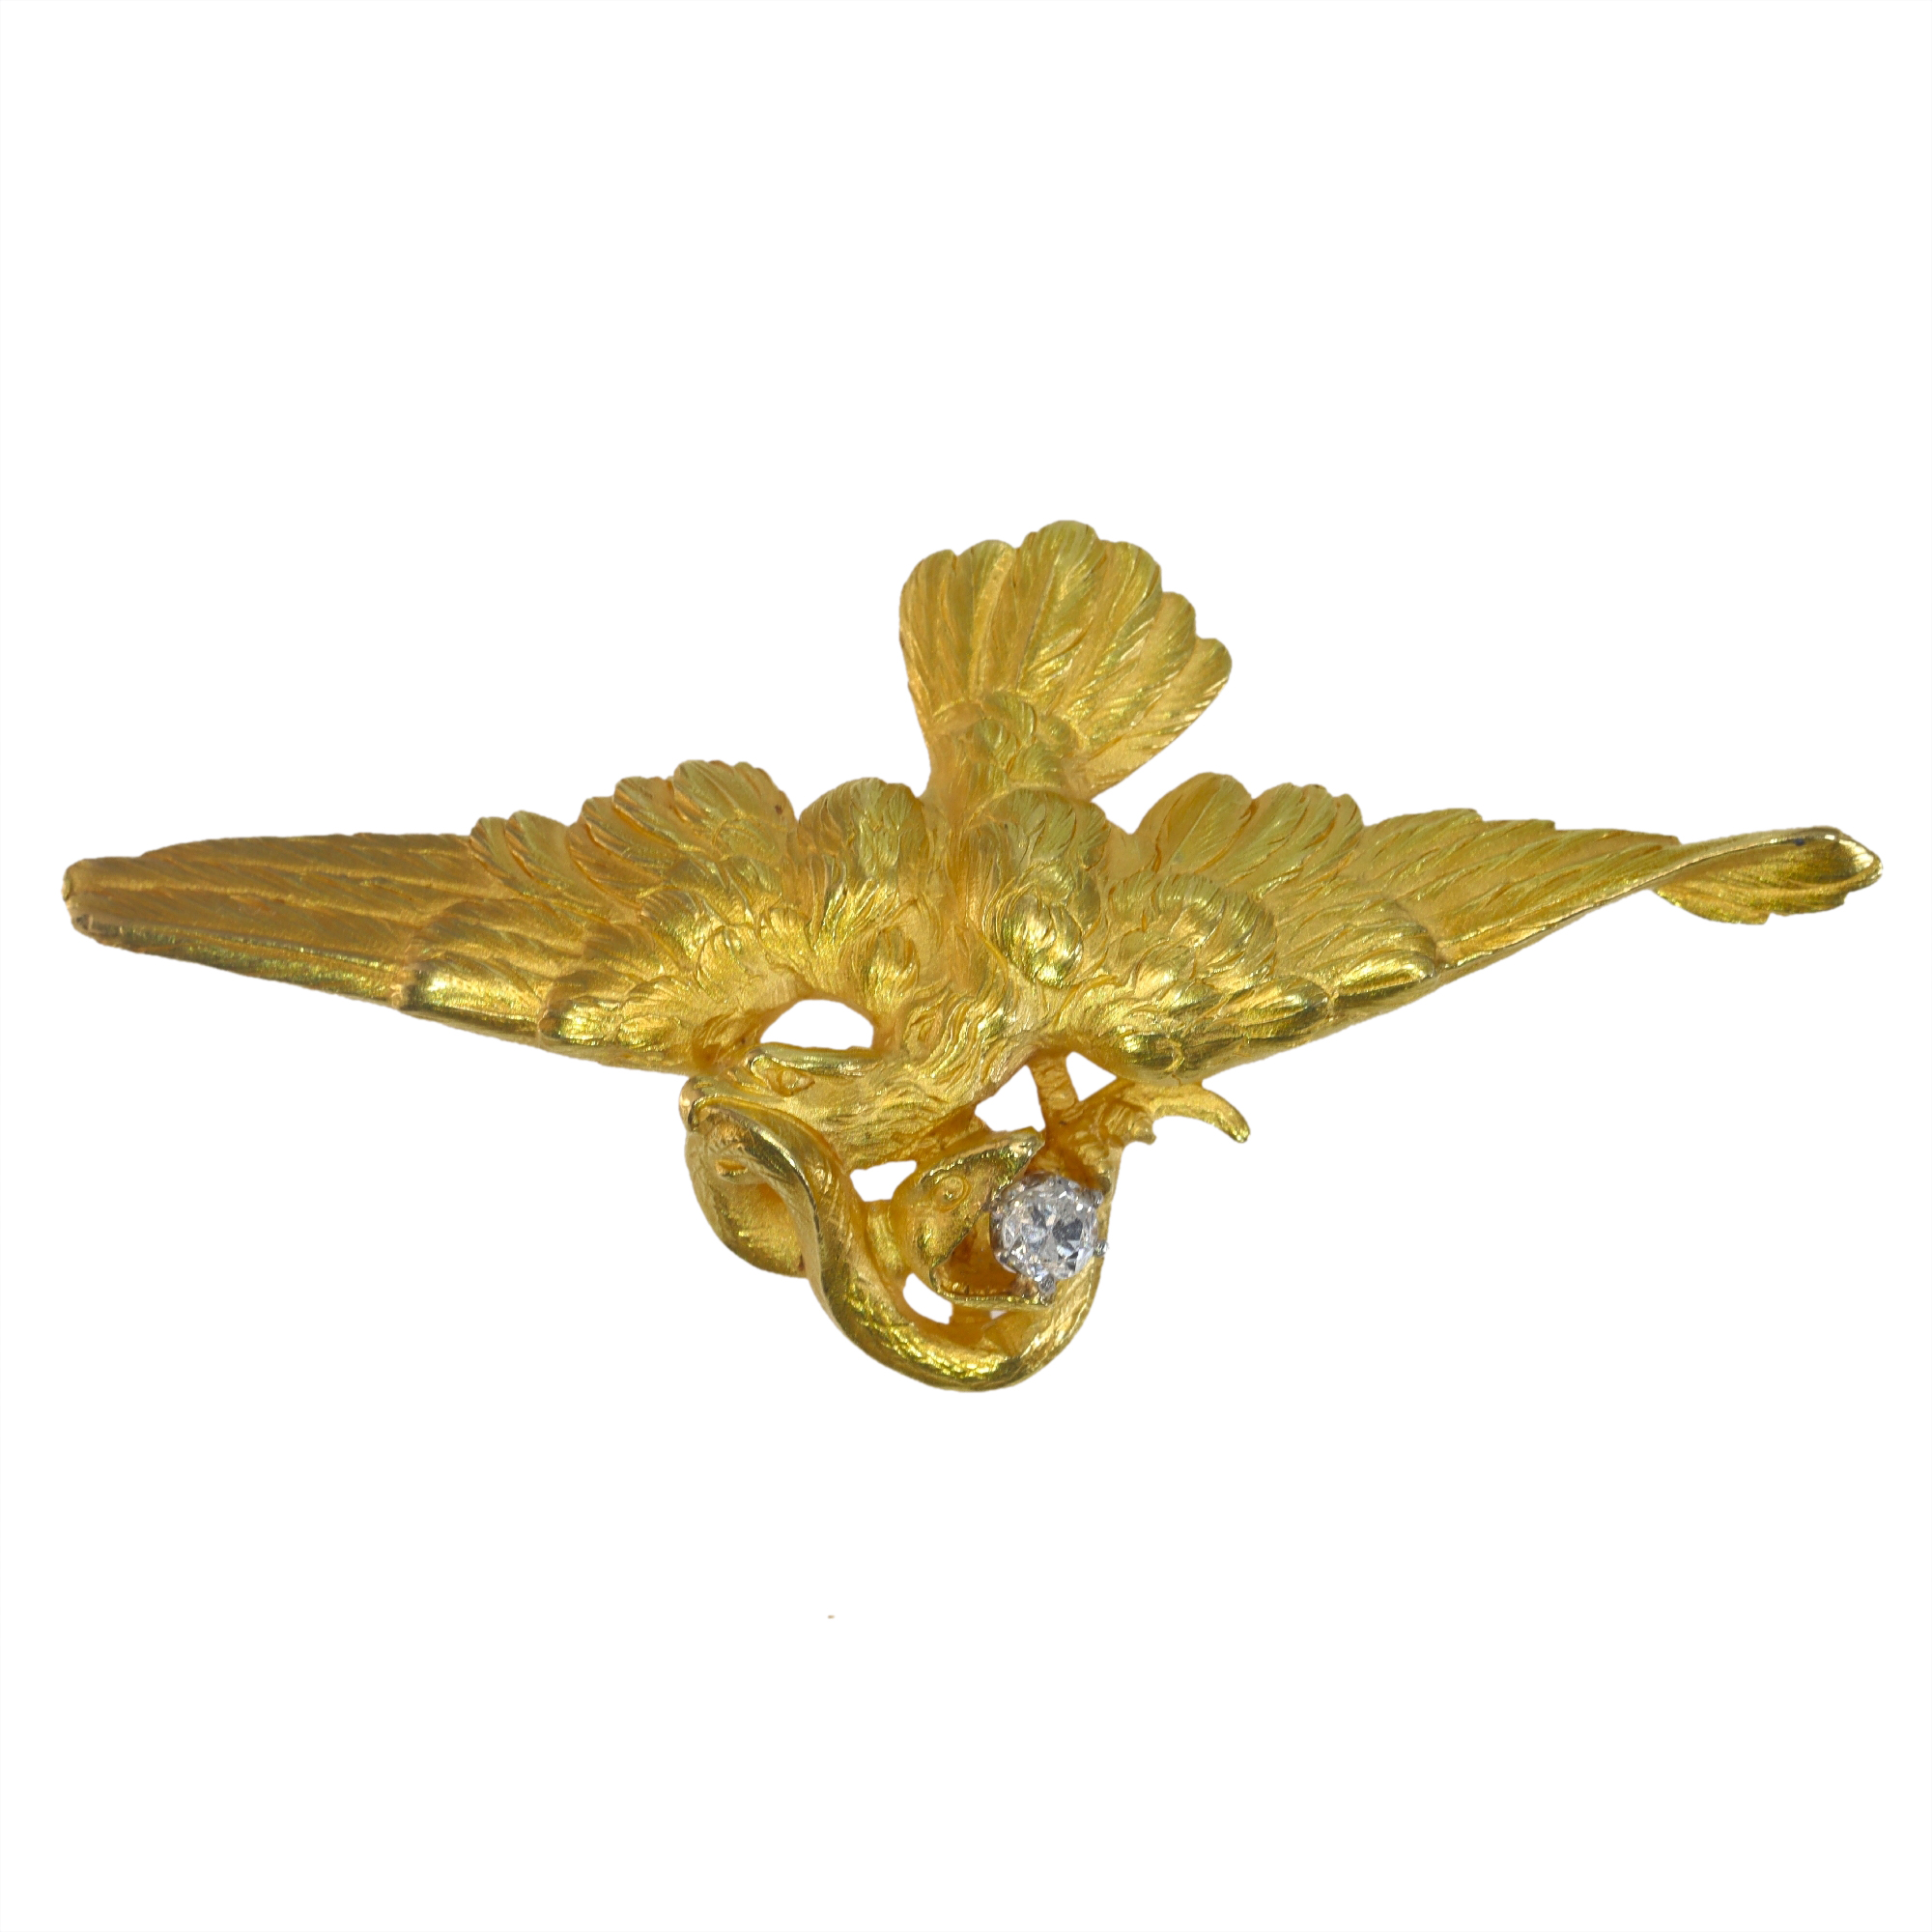 Golden Battle: The Victorian Gold Brooch Where Nature and Luxury Intertwine